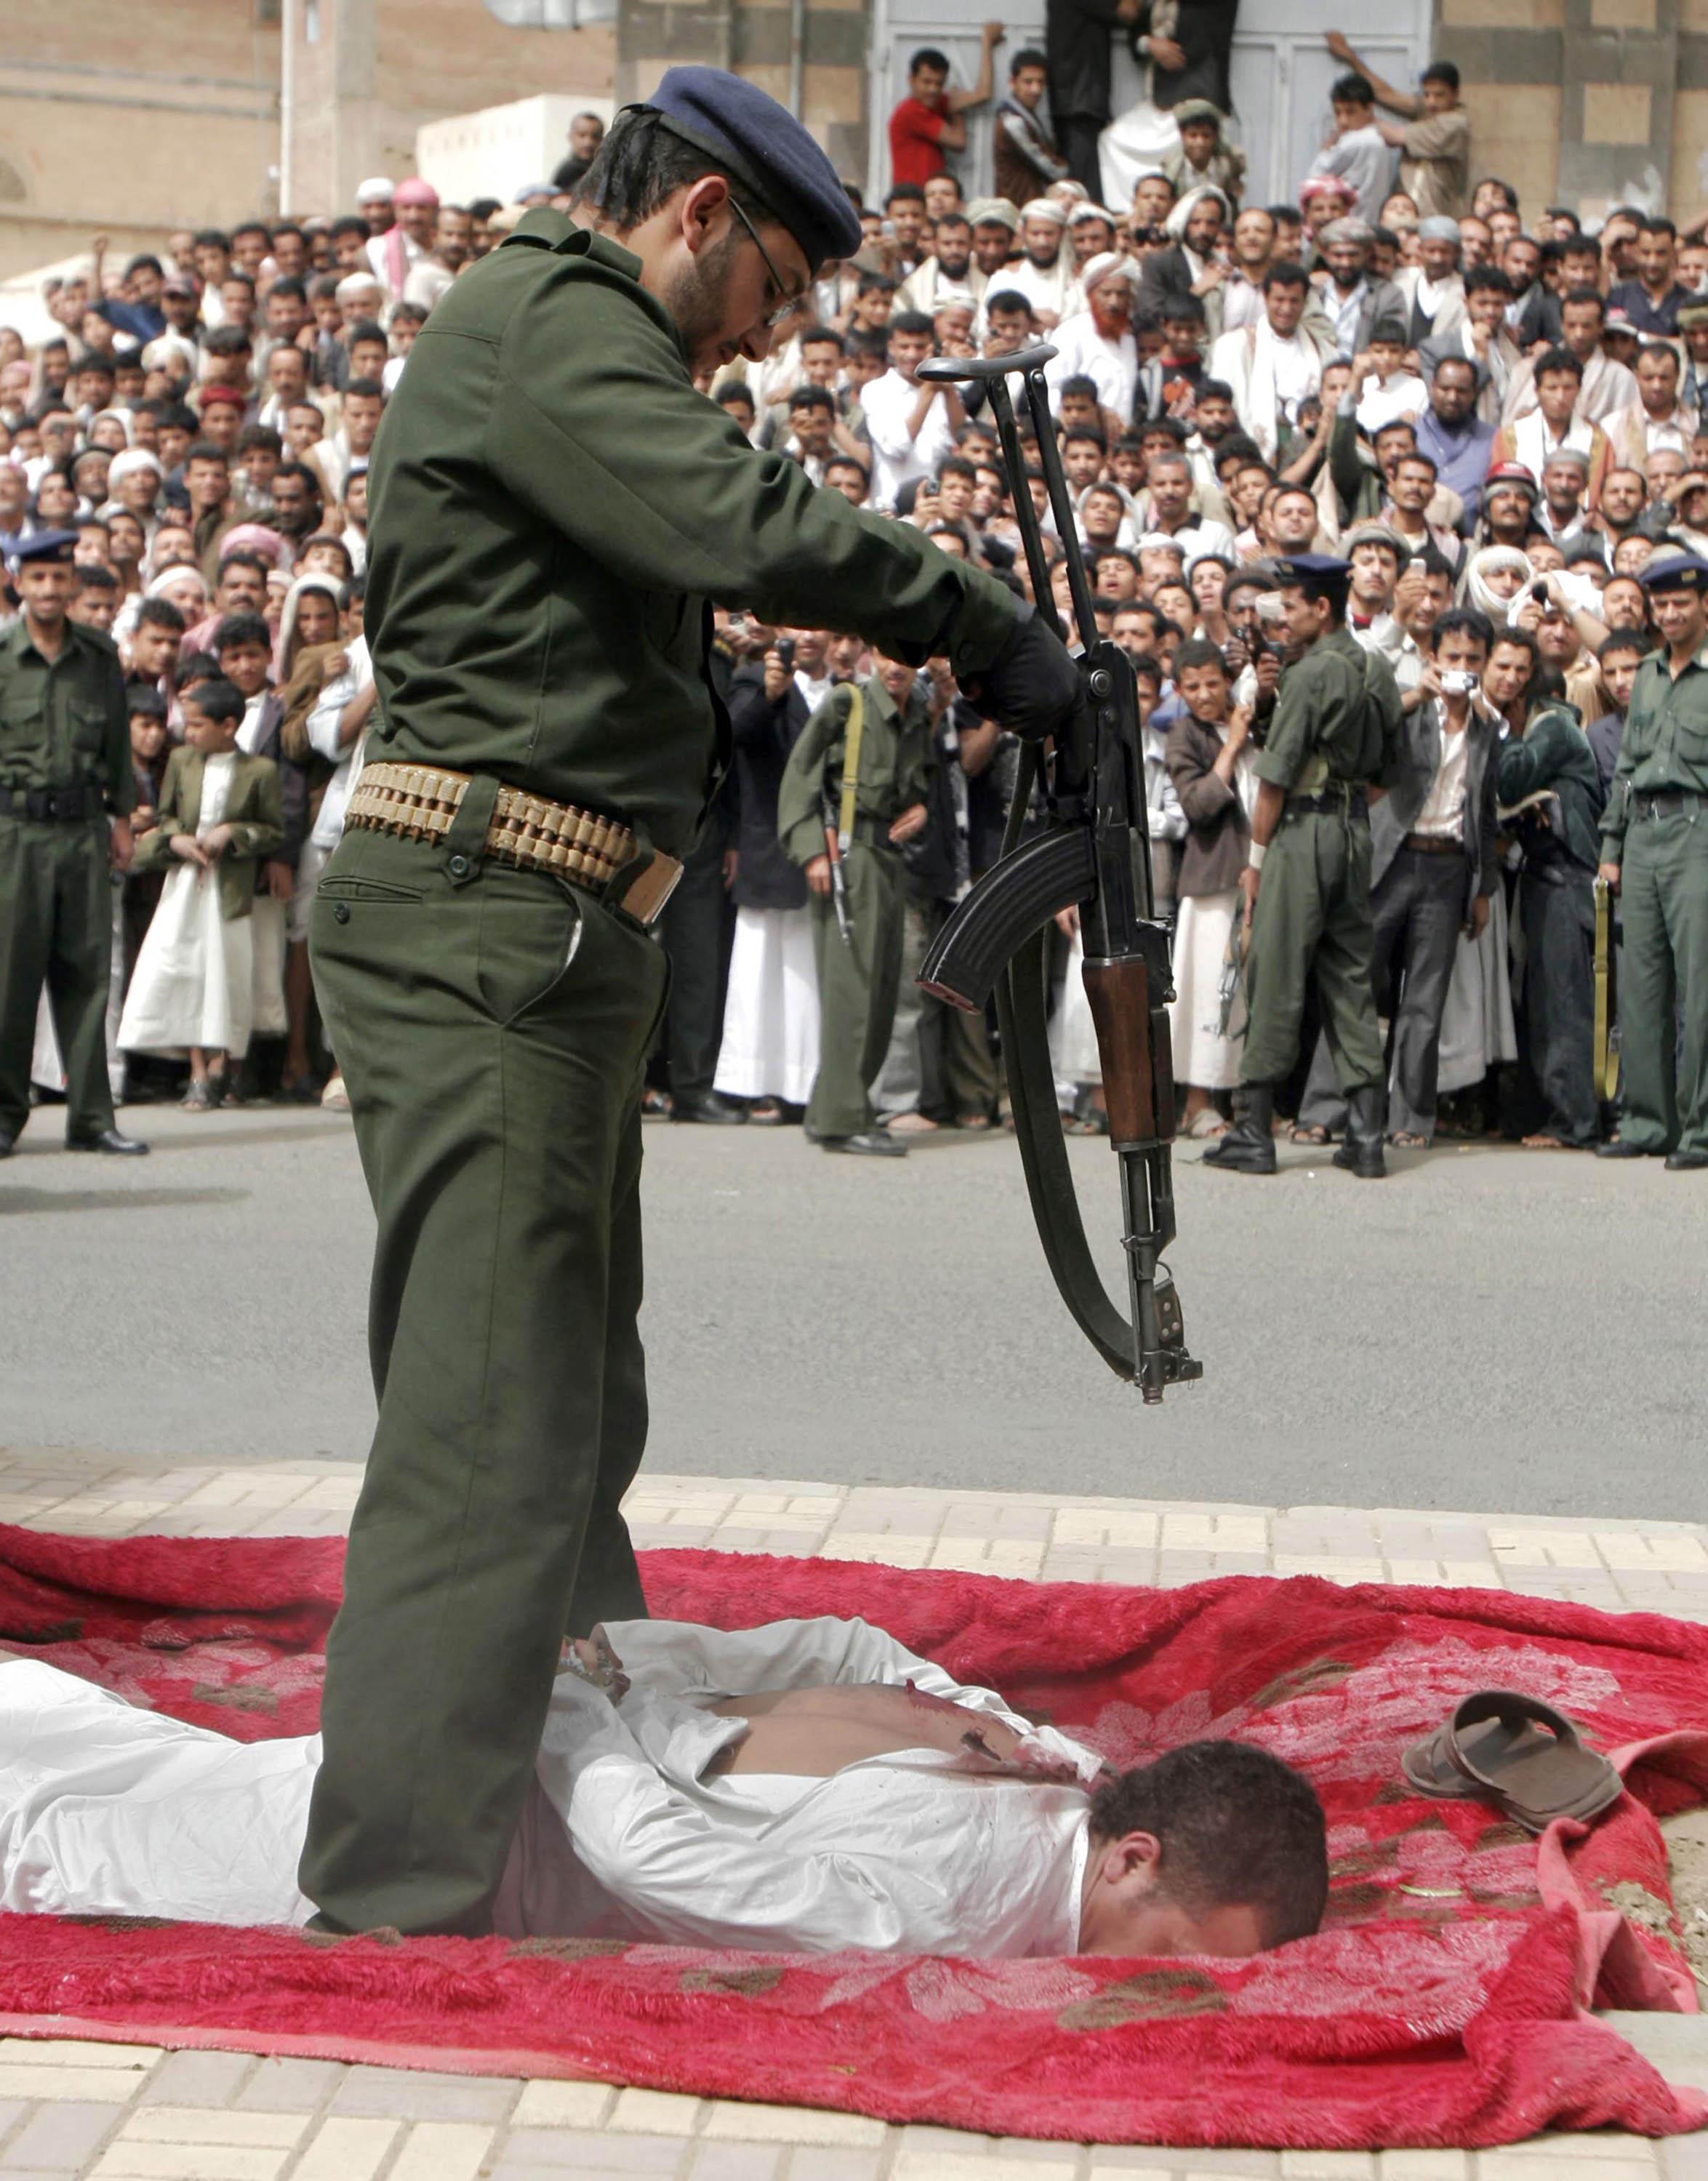 Yemenis gather to watch a Yemeni soldier stand over a man, lying face down on a large piece of red cloth, his hands bound behind him, after shooting him four times, in front of the central prison in San'a, Yemen, Monday, July 6, 2009. The Yemen news agency reports that a barber has been publicly executed after he was found guilty of raping and killing an 11-year-old boy who came to his shop for a haircut. According to the news agency, Saba, the barber was arrested in December 2008 and confessed during a January trial to raping the boy inside his salon, killing him and cutting his body to pieces before dumping it outside San'a. (AP Photo)